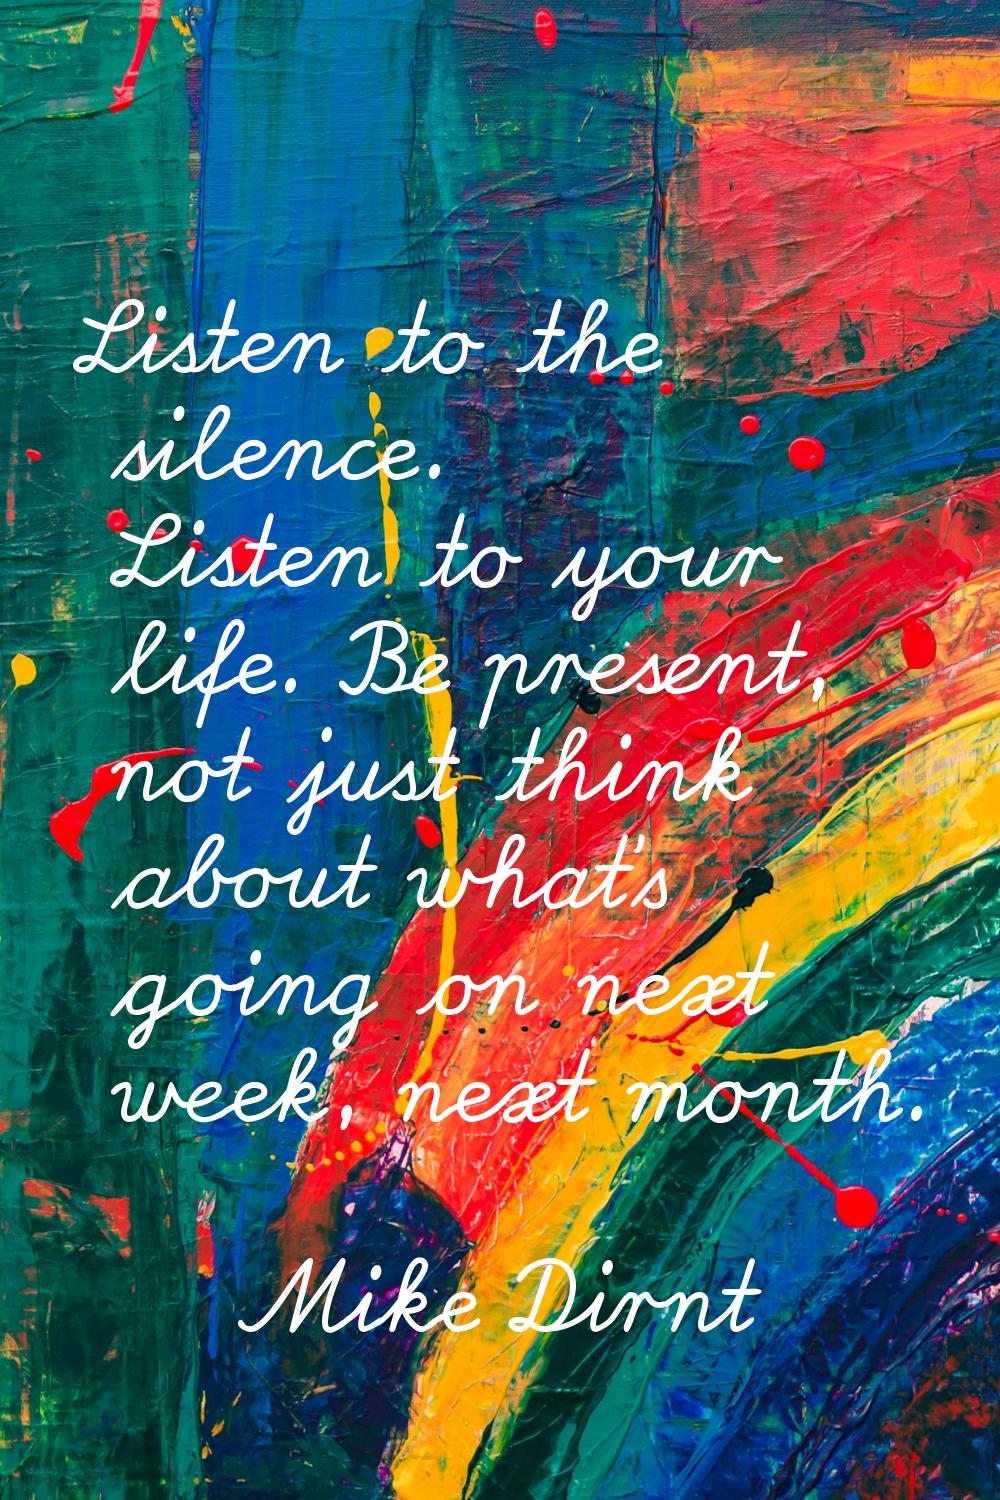 Listen to the silence. Listen to your life. Be present, not just think about what's going on next w